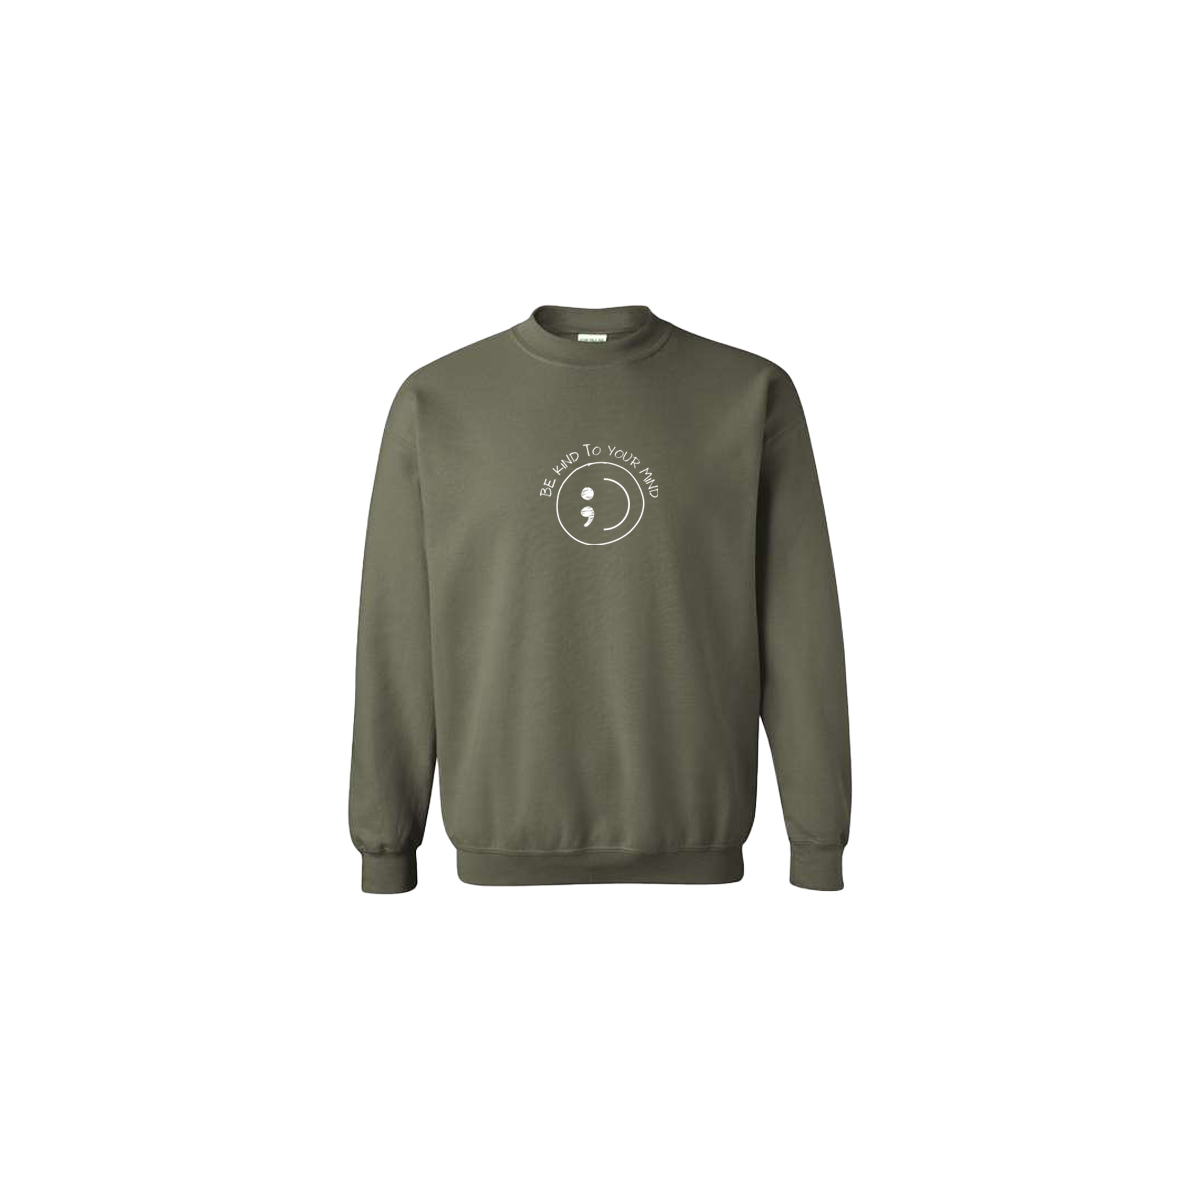 Be Kind To Your Mind Smiley Face Embroidered ArmyGreen Crewneck - Mental Health Awareness Clothing